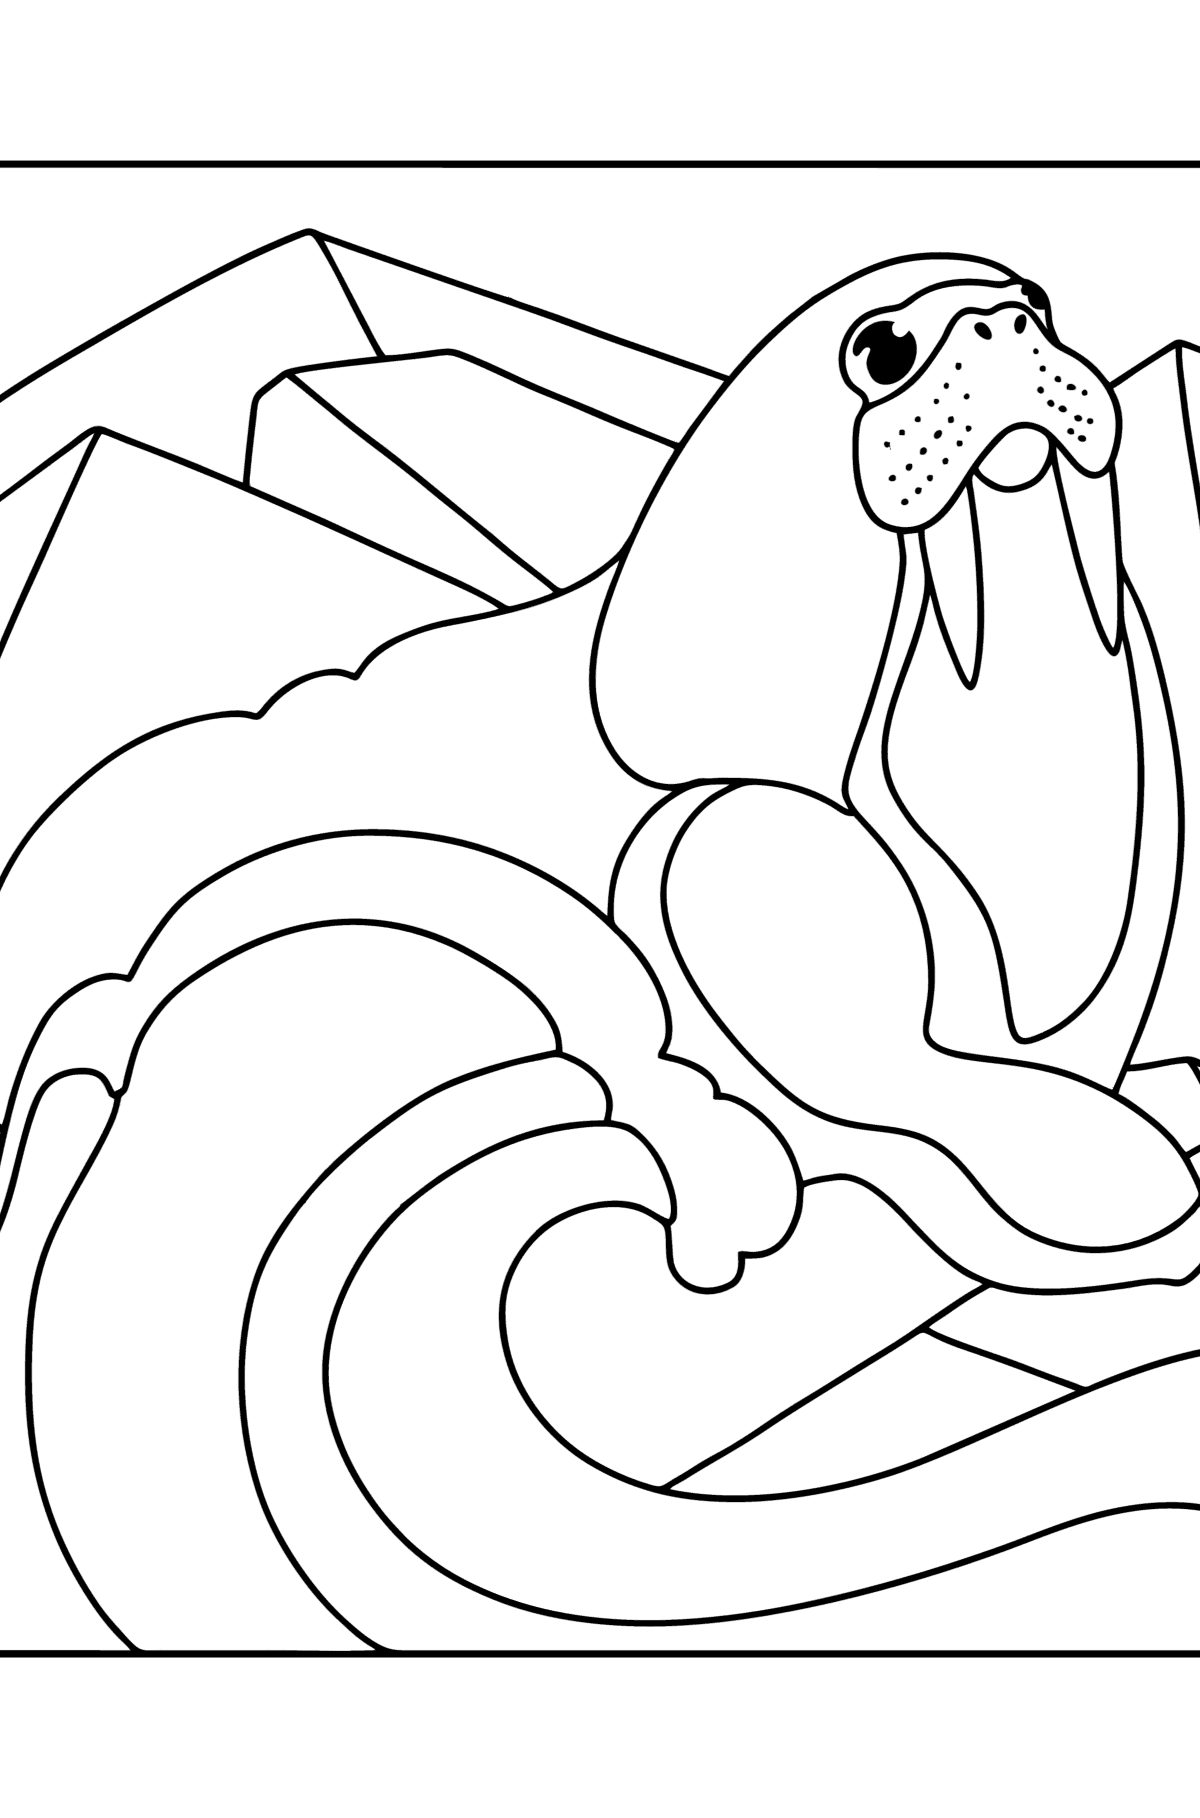 Atlantic Walrus coloring page - Coloring Pages for Kids